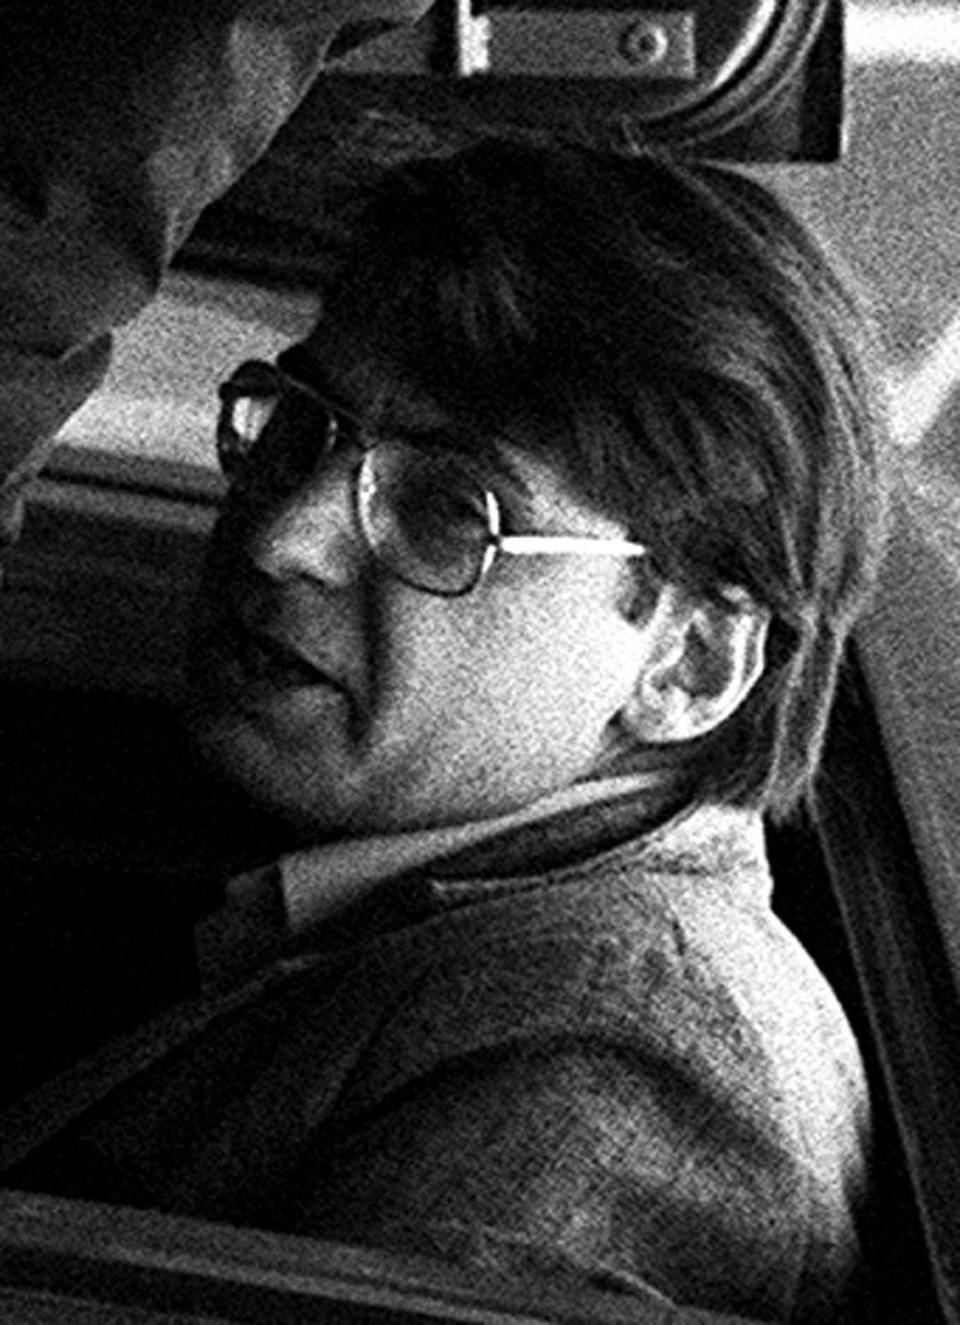 PA NEWS PHOTO 25/10/83  DENNIS ANDREW NILSEN LEAVING HIGHGATE COURT, LONDON ACCUSED OF SIX MURDERS AND TWO ATTEMPTED MURDERS *25/10/01...Serial killer  Nilsen, 45, was, seeking a High Court judge's permission to challenge a ban on him publishing his autobiography and other writings.  Lawyers for Nilsen, who is serving life for murdering at least 12 men, were expected to argue that the governor at Whitemoor top security prison was unlawfully blocking publication in breach of his human rights.  *20/10/03: Serial killer Dennis Nilsen accused Home Secretary David Blunkett and the prison authorities of unlawfully preventing him from working on and publishing his autobiography. His QC Alison Foster accused Mr Blunkett and the governor of Full Sutton Prison, near York, of breaching his human rights by refusing to return a copy of the partially-completed work.Nilsen, 57, admitted killing and butchering 15 young men, most of them homeless homosexuals, at his north London home. The former policeman was jailed for life in 1983, with a recommendation that he serve a minimum of 25 years, on six counts of murder and two of attempted murder.  19/12/03: Dennis Nilsen who today lost his High Court battle for the right to continue working on and publishing his autobiography.   30/01/04: The Serial killer Dennis Nilsen was today refused permission to appeal against a recent court ruling which effectively denied him the right to continue working on and publishing his autobiography. His plea for a judicial review was rejected by Mr Justice Maurice Kay at the High Court in London last month.  *05/05/04:  Dennis Nilsen dated 25/10/83. Nilsen won permission to appeal against a ruling which denied him the right to continue working on his autobiography. 